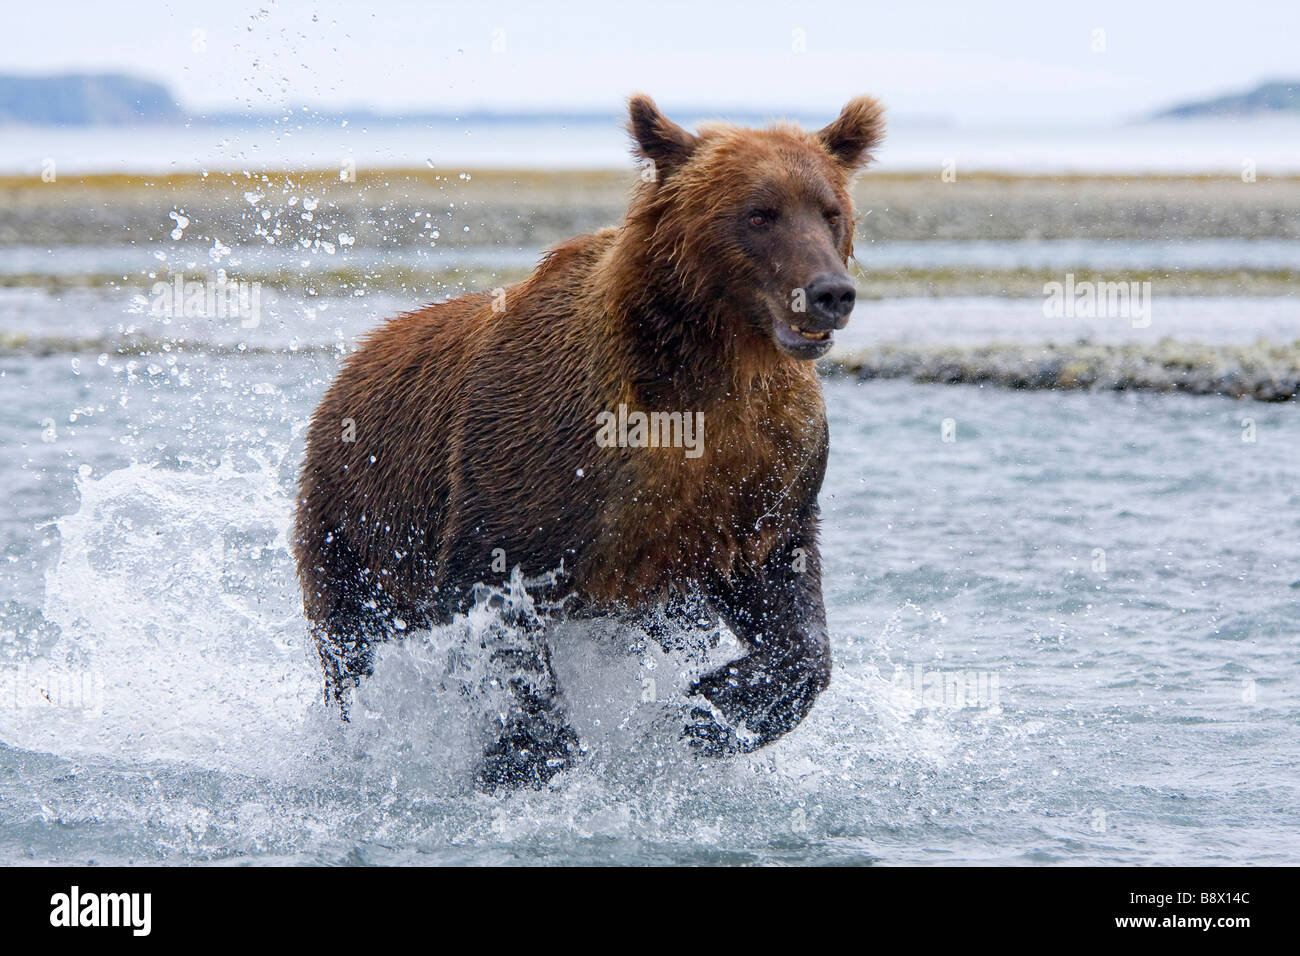 Grizzly bear (Ursus arctos horribilis) running in a river Stock Photo